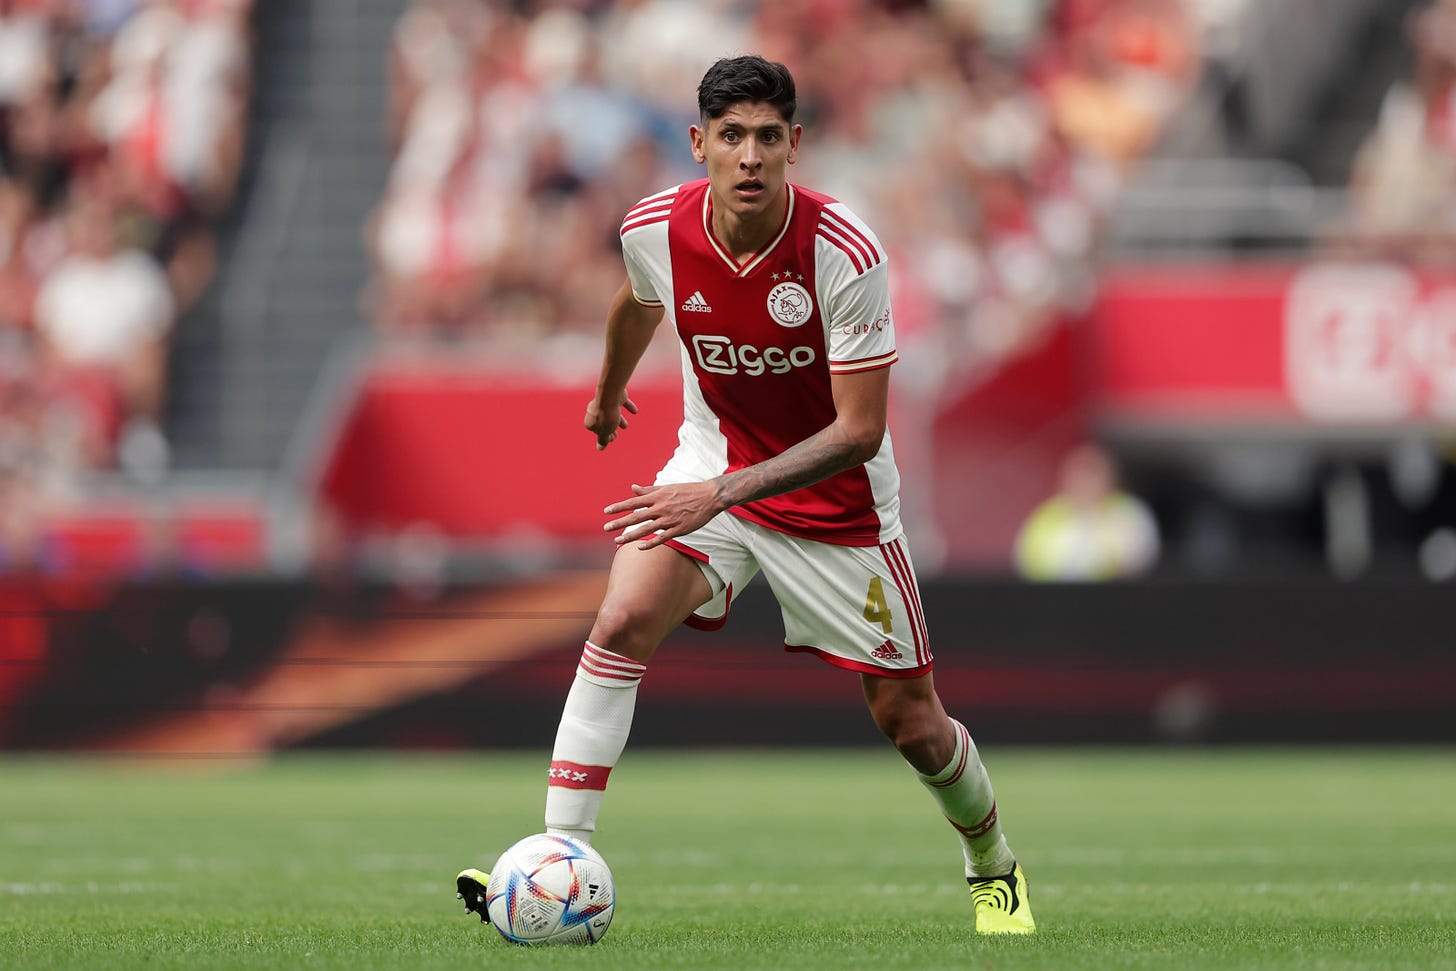 Who does Edson Alvarez replace in this current Chelsea side?